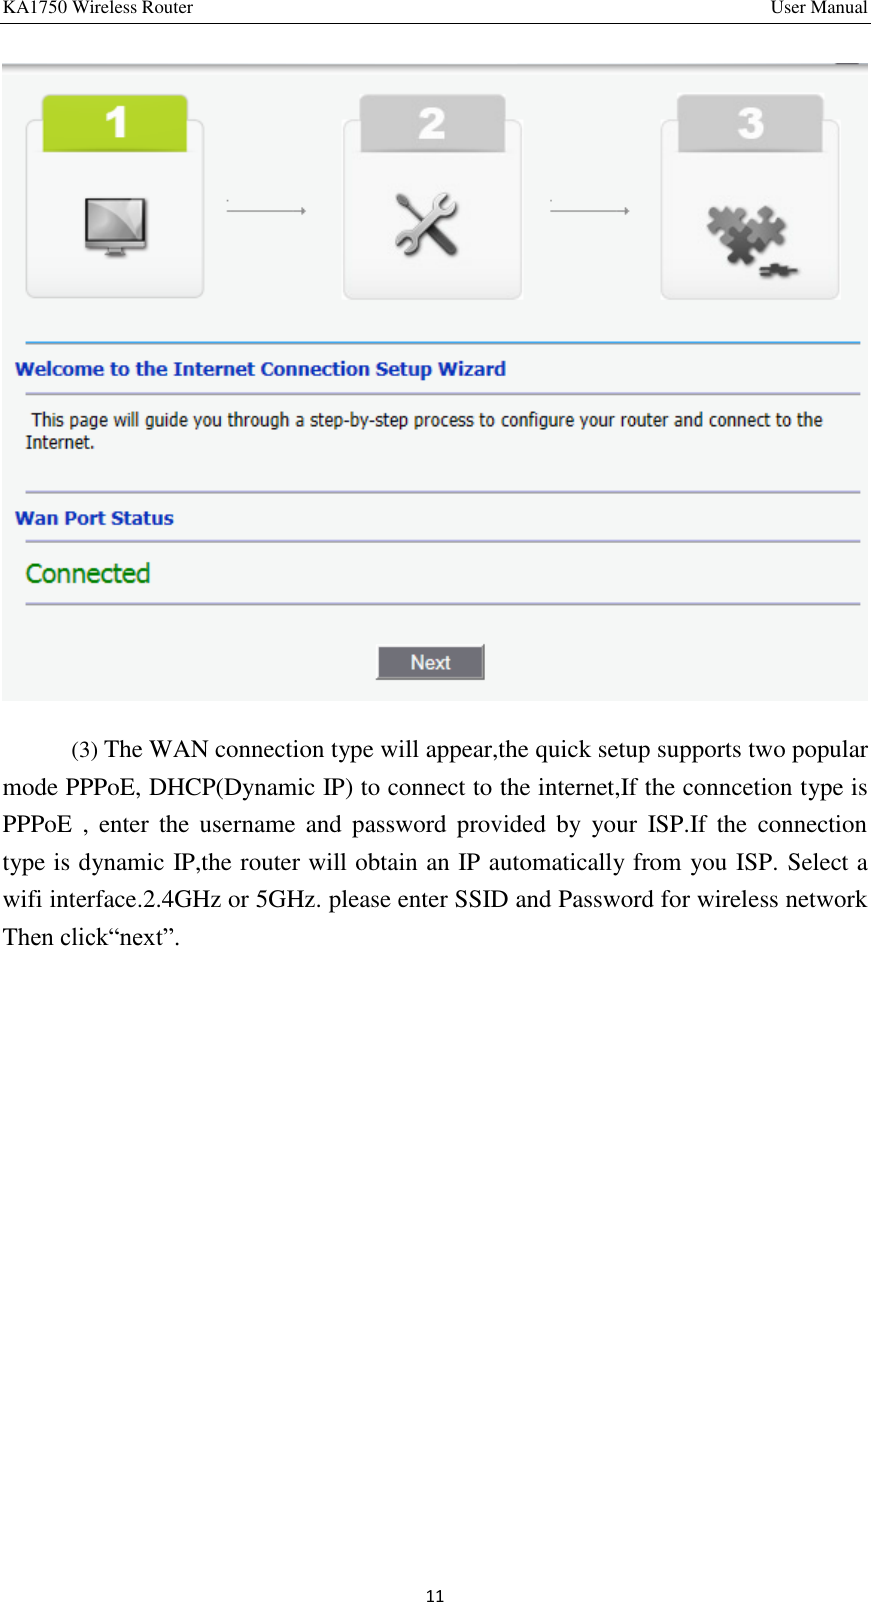 KA1750 Wireless Router       User Manual 11  (3) The WAN connection type will appear,the quick setup supports two popular mode PPPoE, DHCP(Dynamic IP) to connect to the internet,If the conncetion type is PPPoE  ,  enter the  username  and  password  provided  by  your  ISP.If  the  connection type is dynamic IP,the router will obtain an IP automatically from you ISP. Select a wifi interface.2.4GHz or 5GHz. please enter SSID and Password for wireless network Then click“next”.   